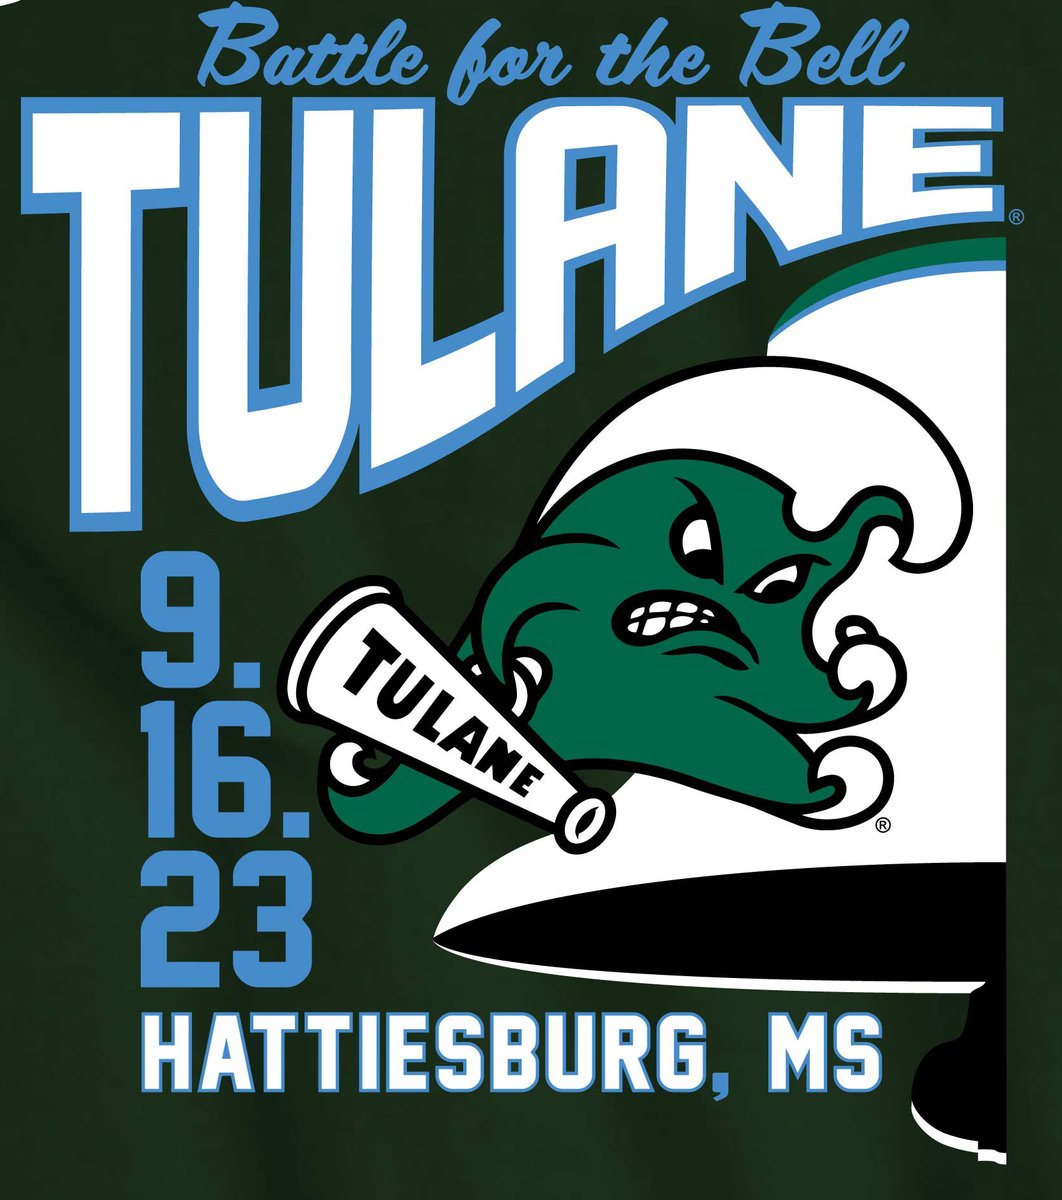 What do we think about this shirt design for Week 3 vs. Southern Miss? #rollwave